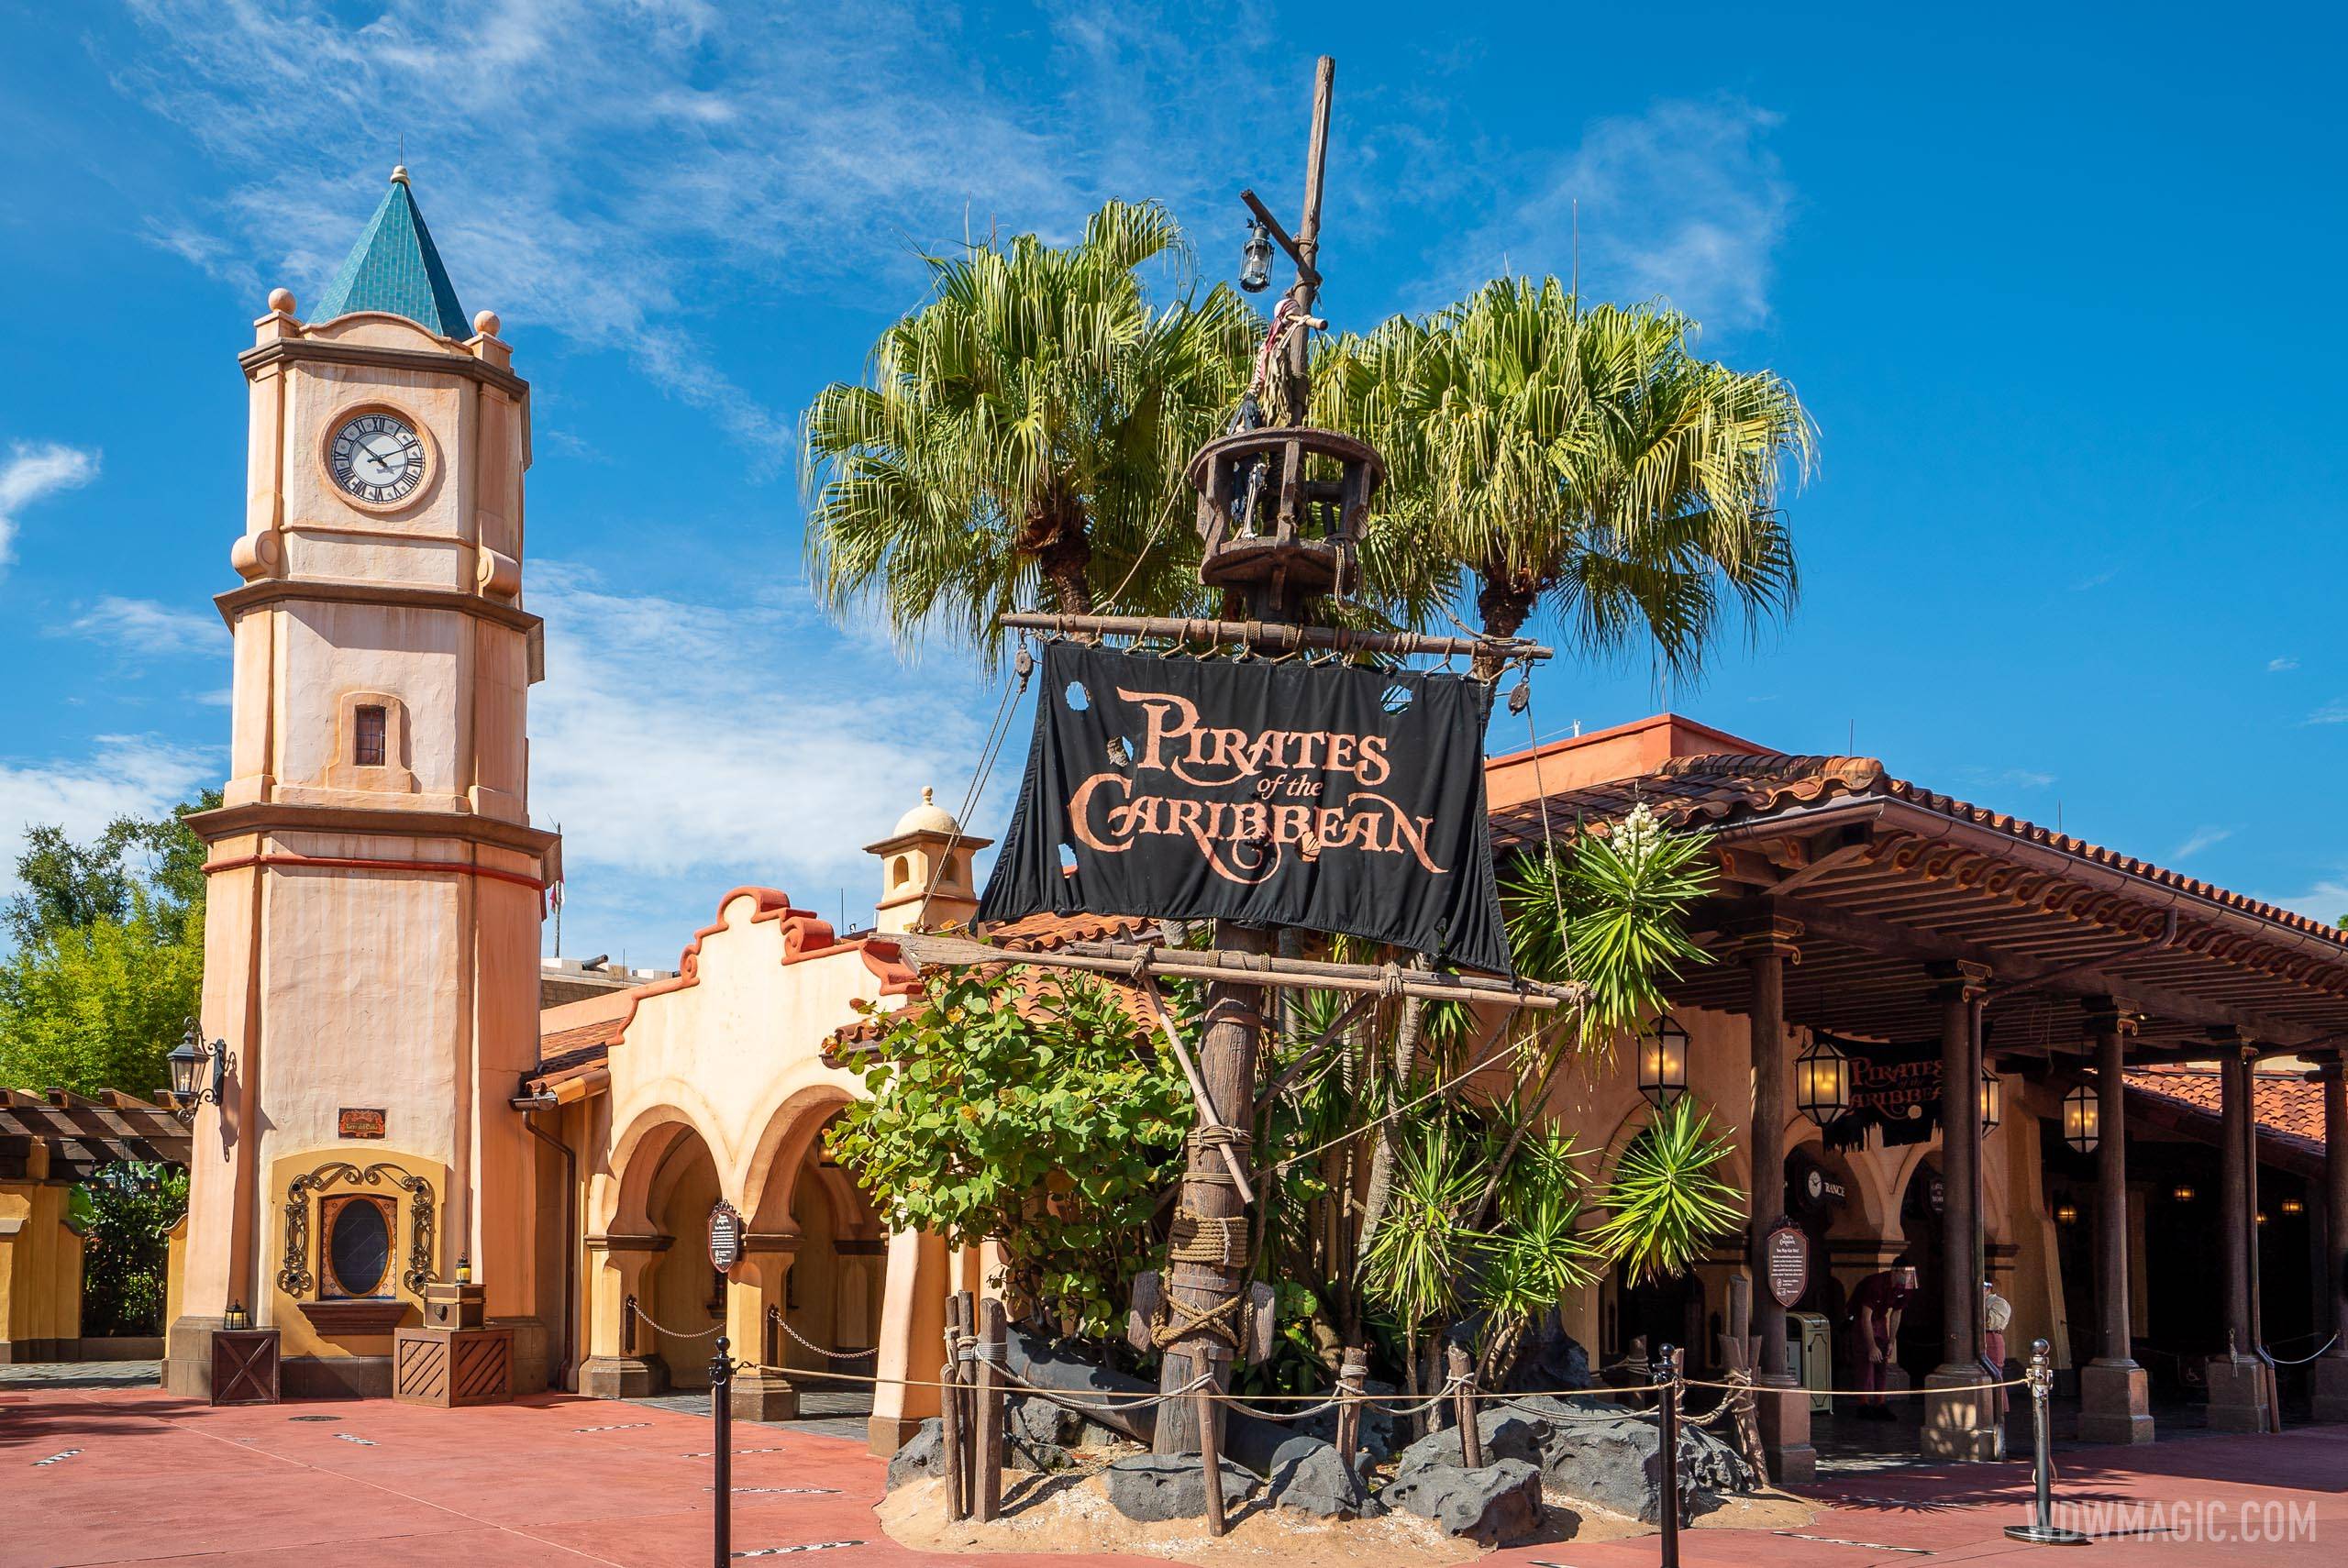 Pirates of the Caribbean overview